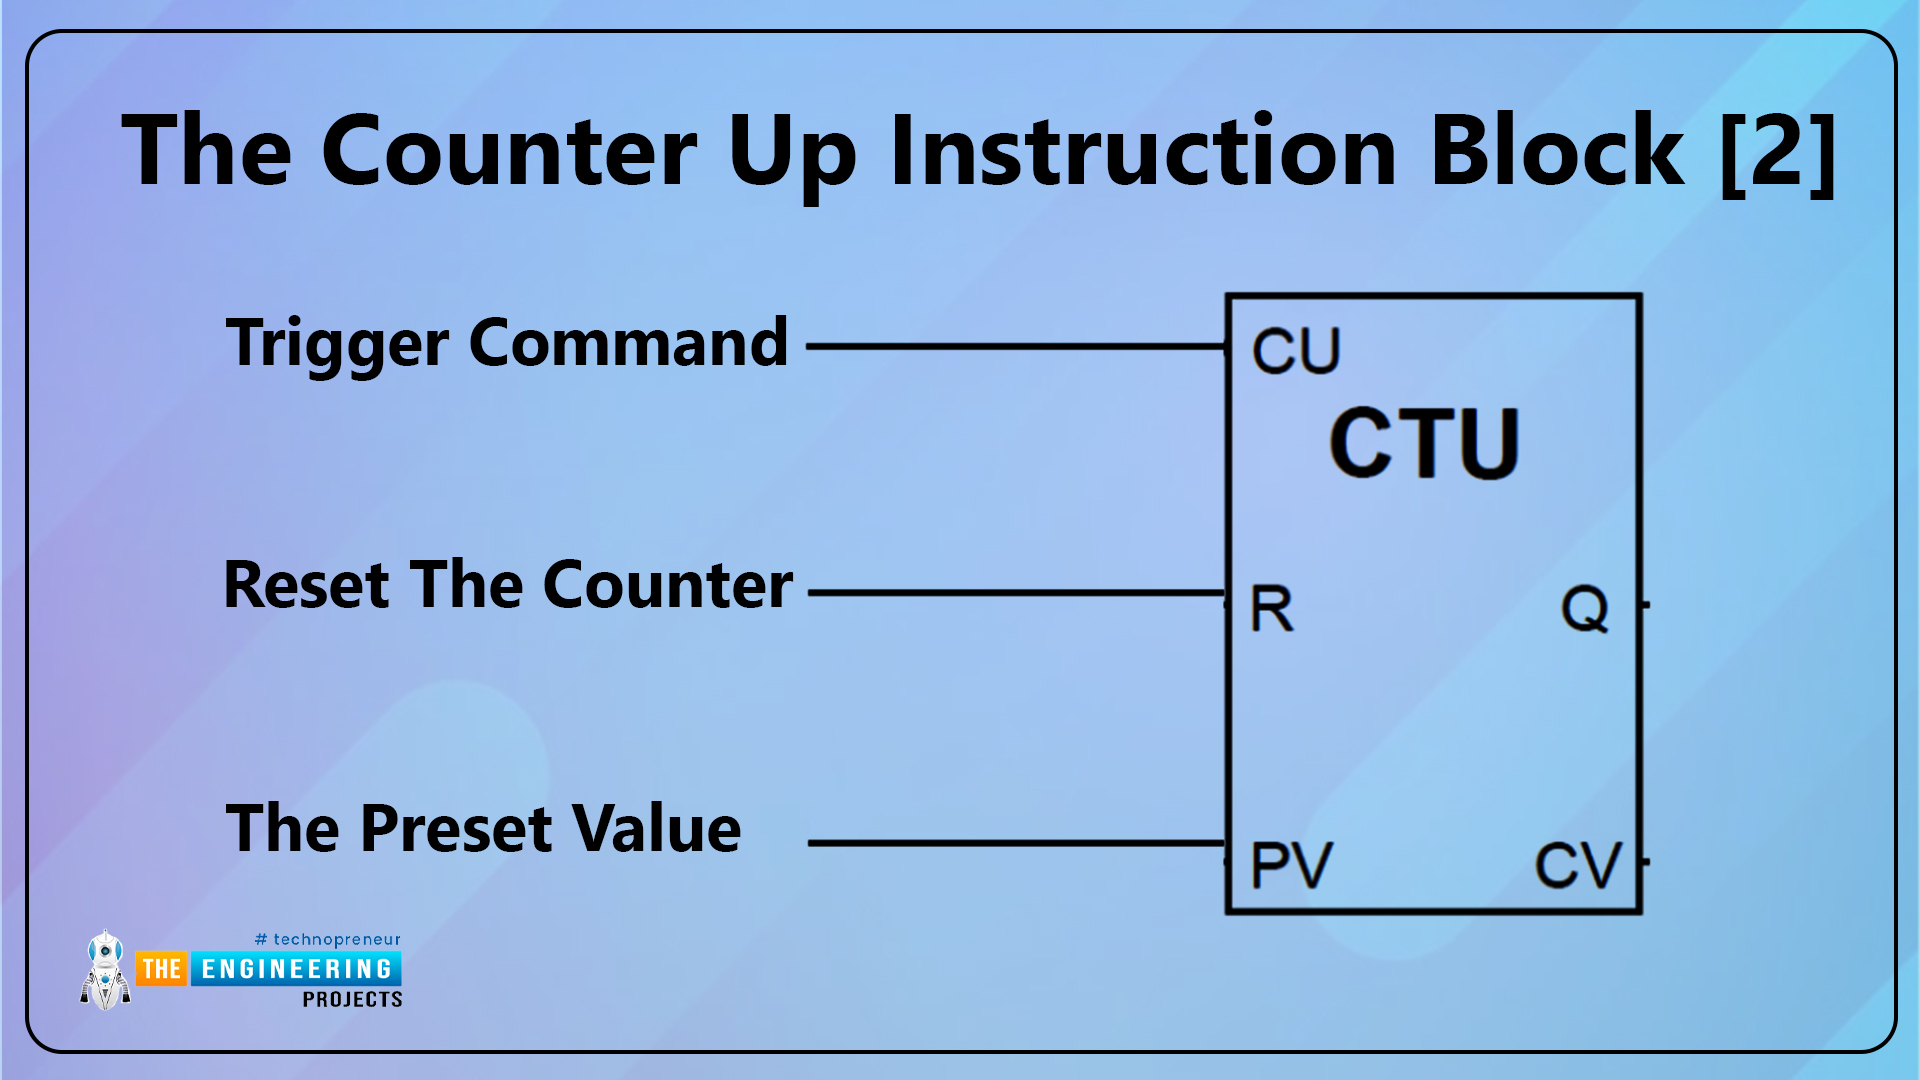 How to use counters in ladder logic programming, Counter in conventional control, Omron counter, Asynchronous 0-9 counter, Counter in PLC, Count-up type, Ladder program examples for counters, Count down example, Testing the up-down counter ladder program